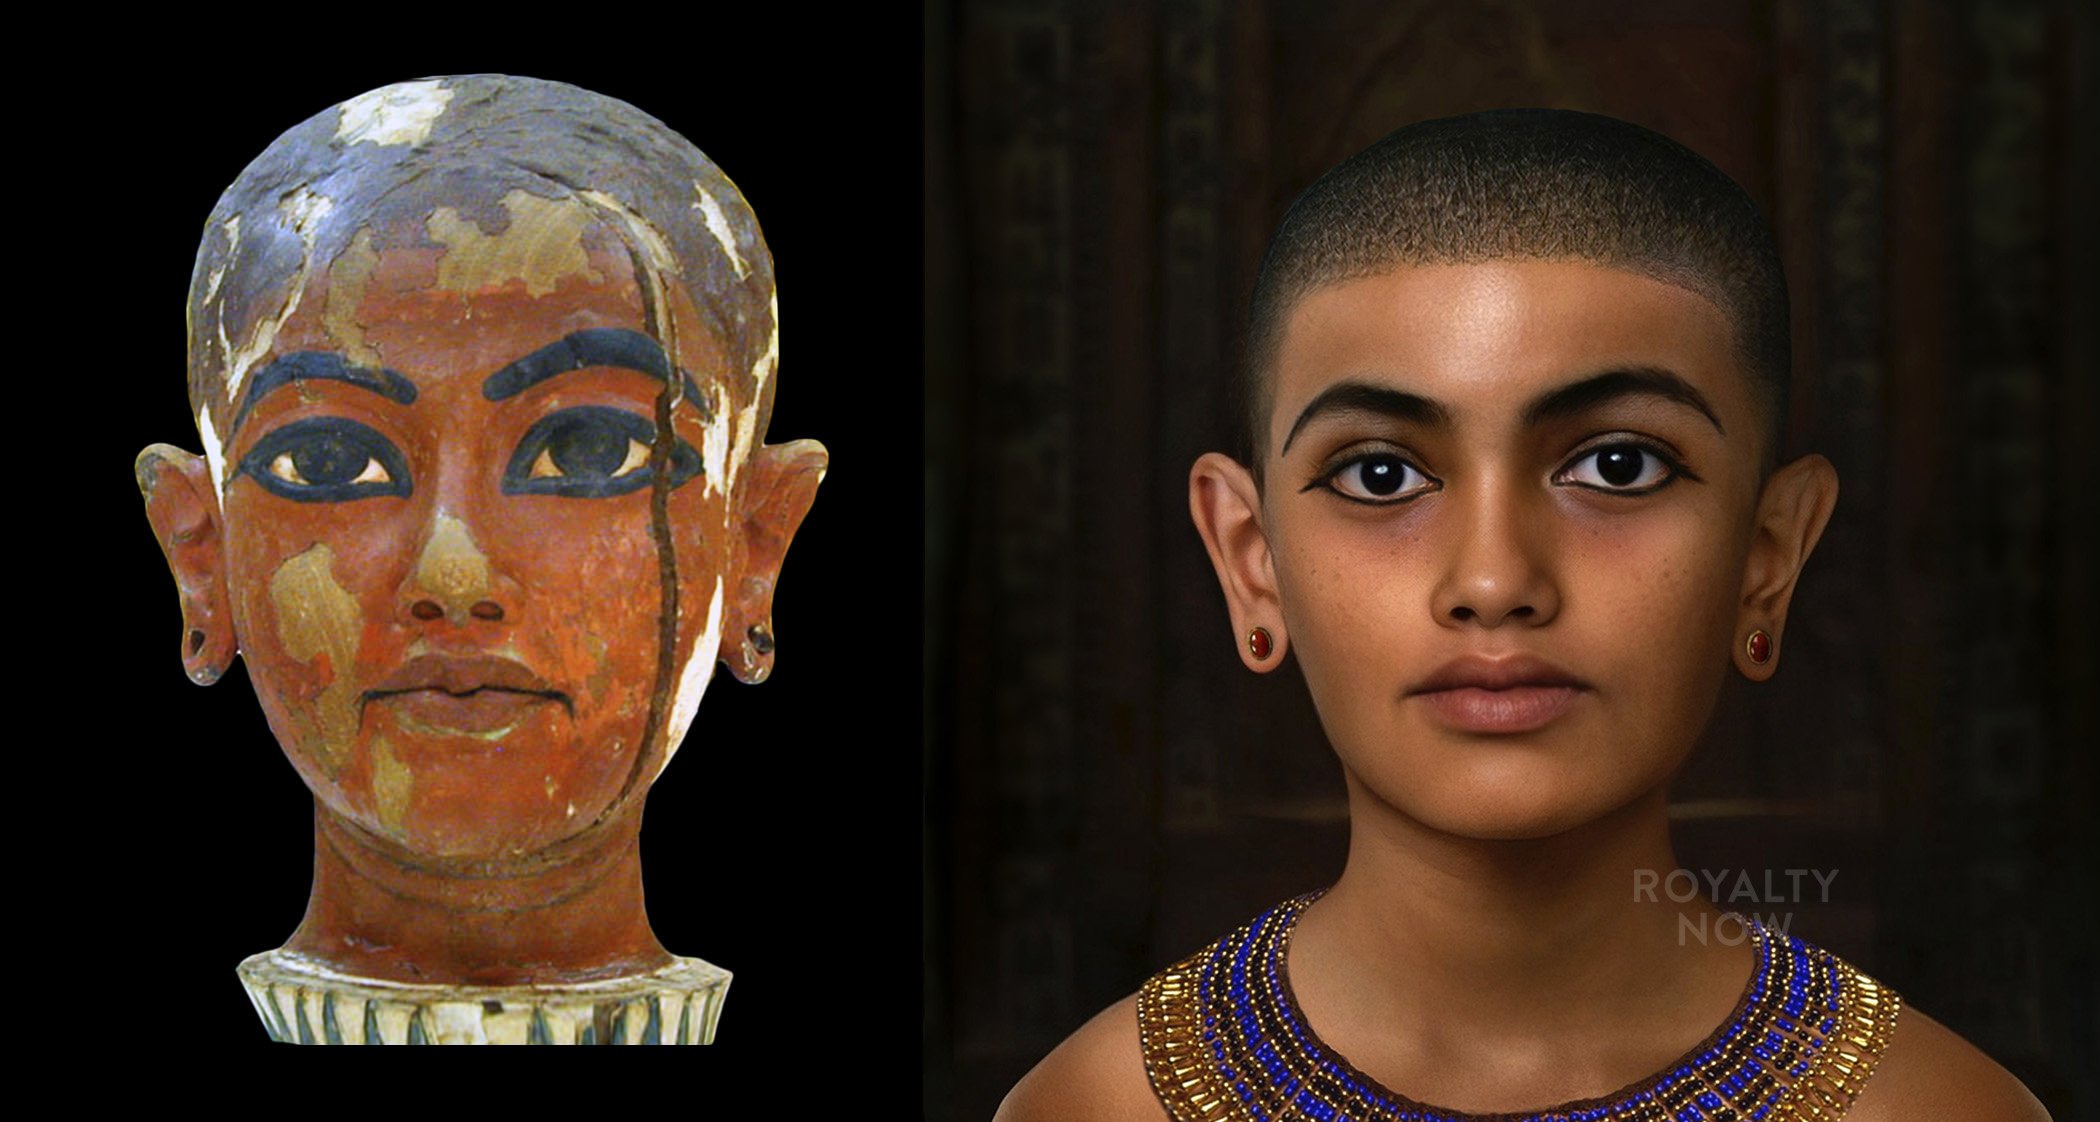 What did King Tut look like? — RoyaltyNow